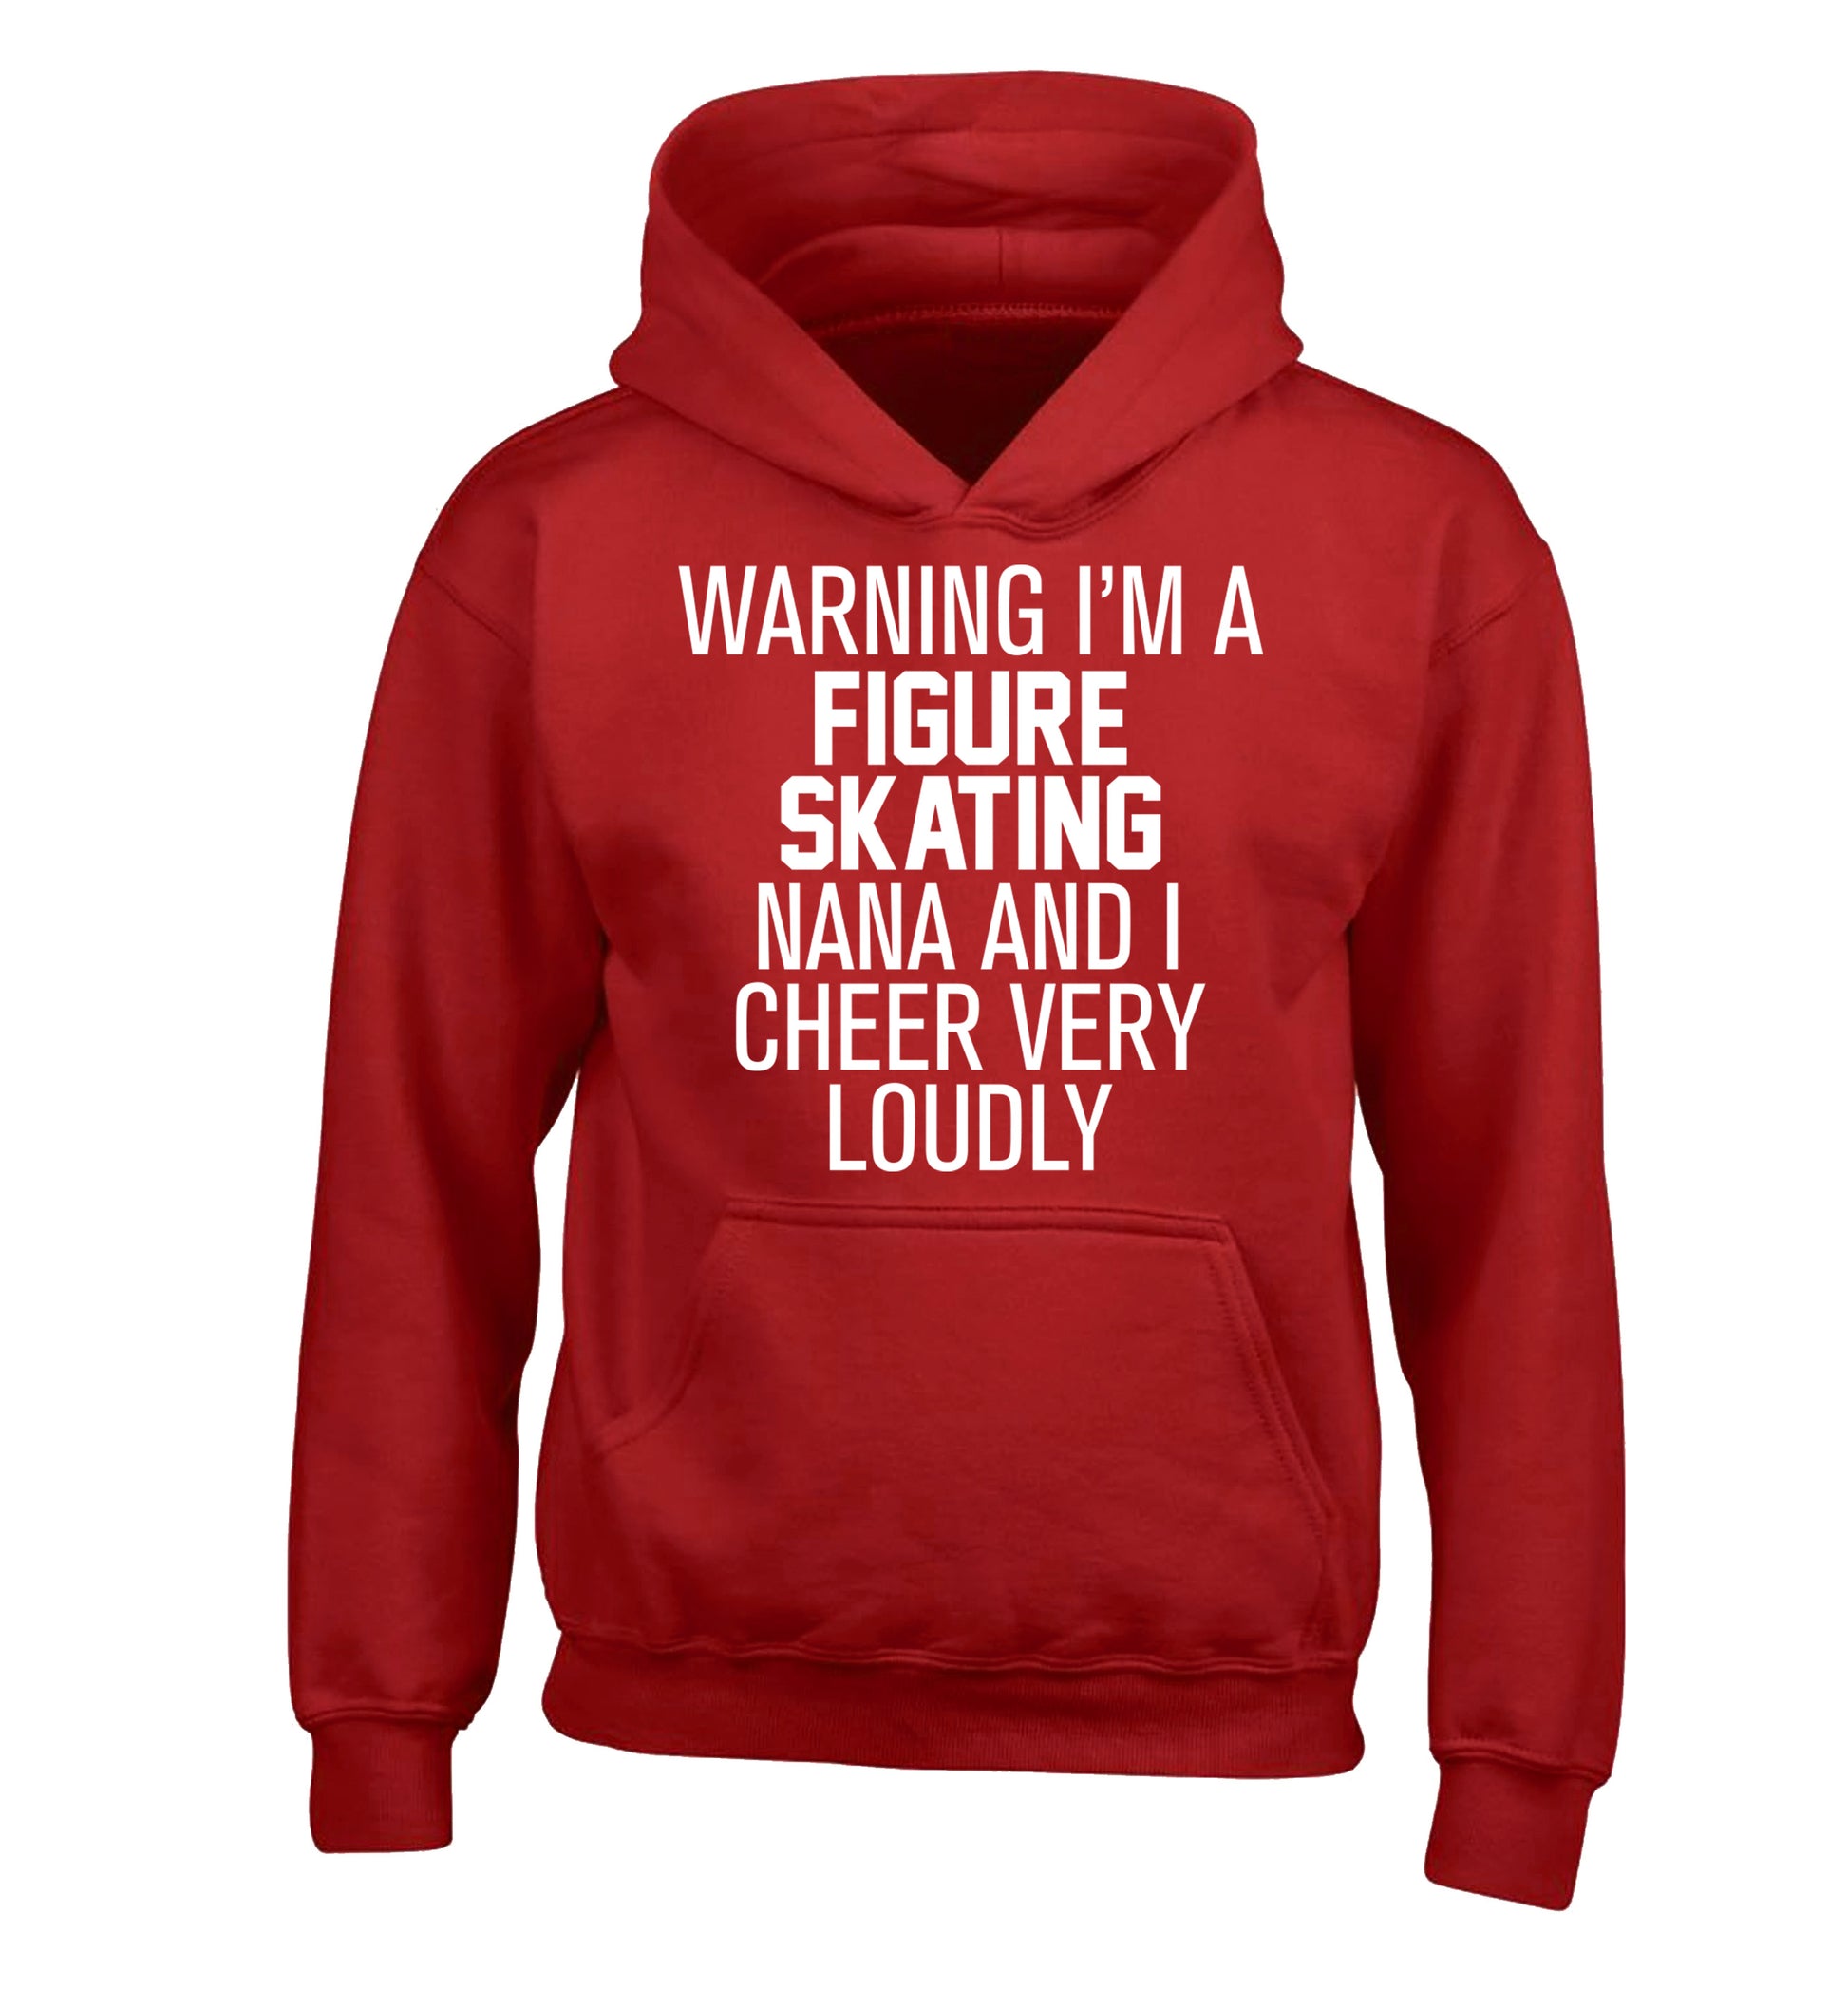 Warning I'm a figure skating nana and I cheer very loudly children's red hoodie 12-14 Years